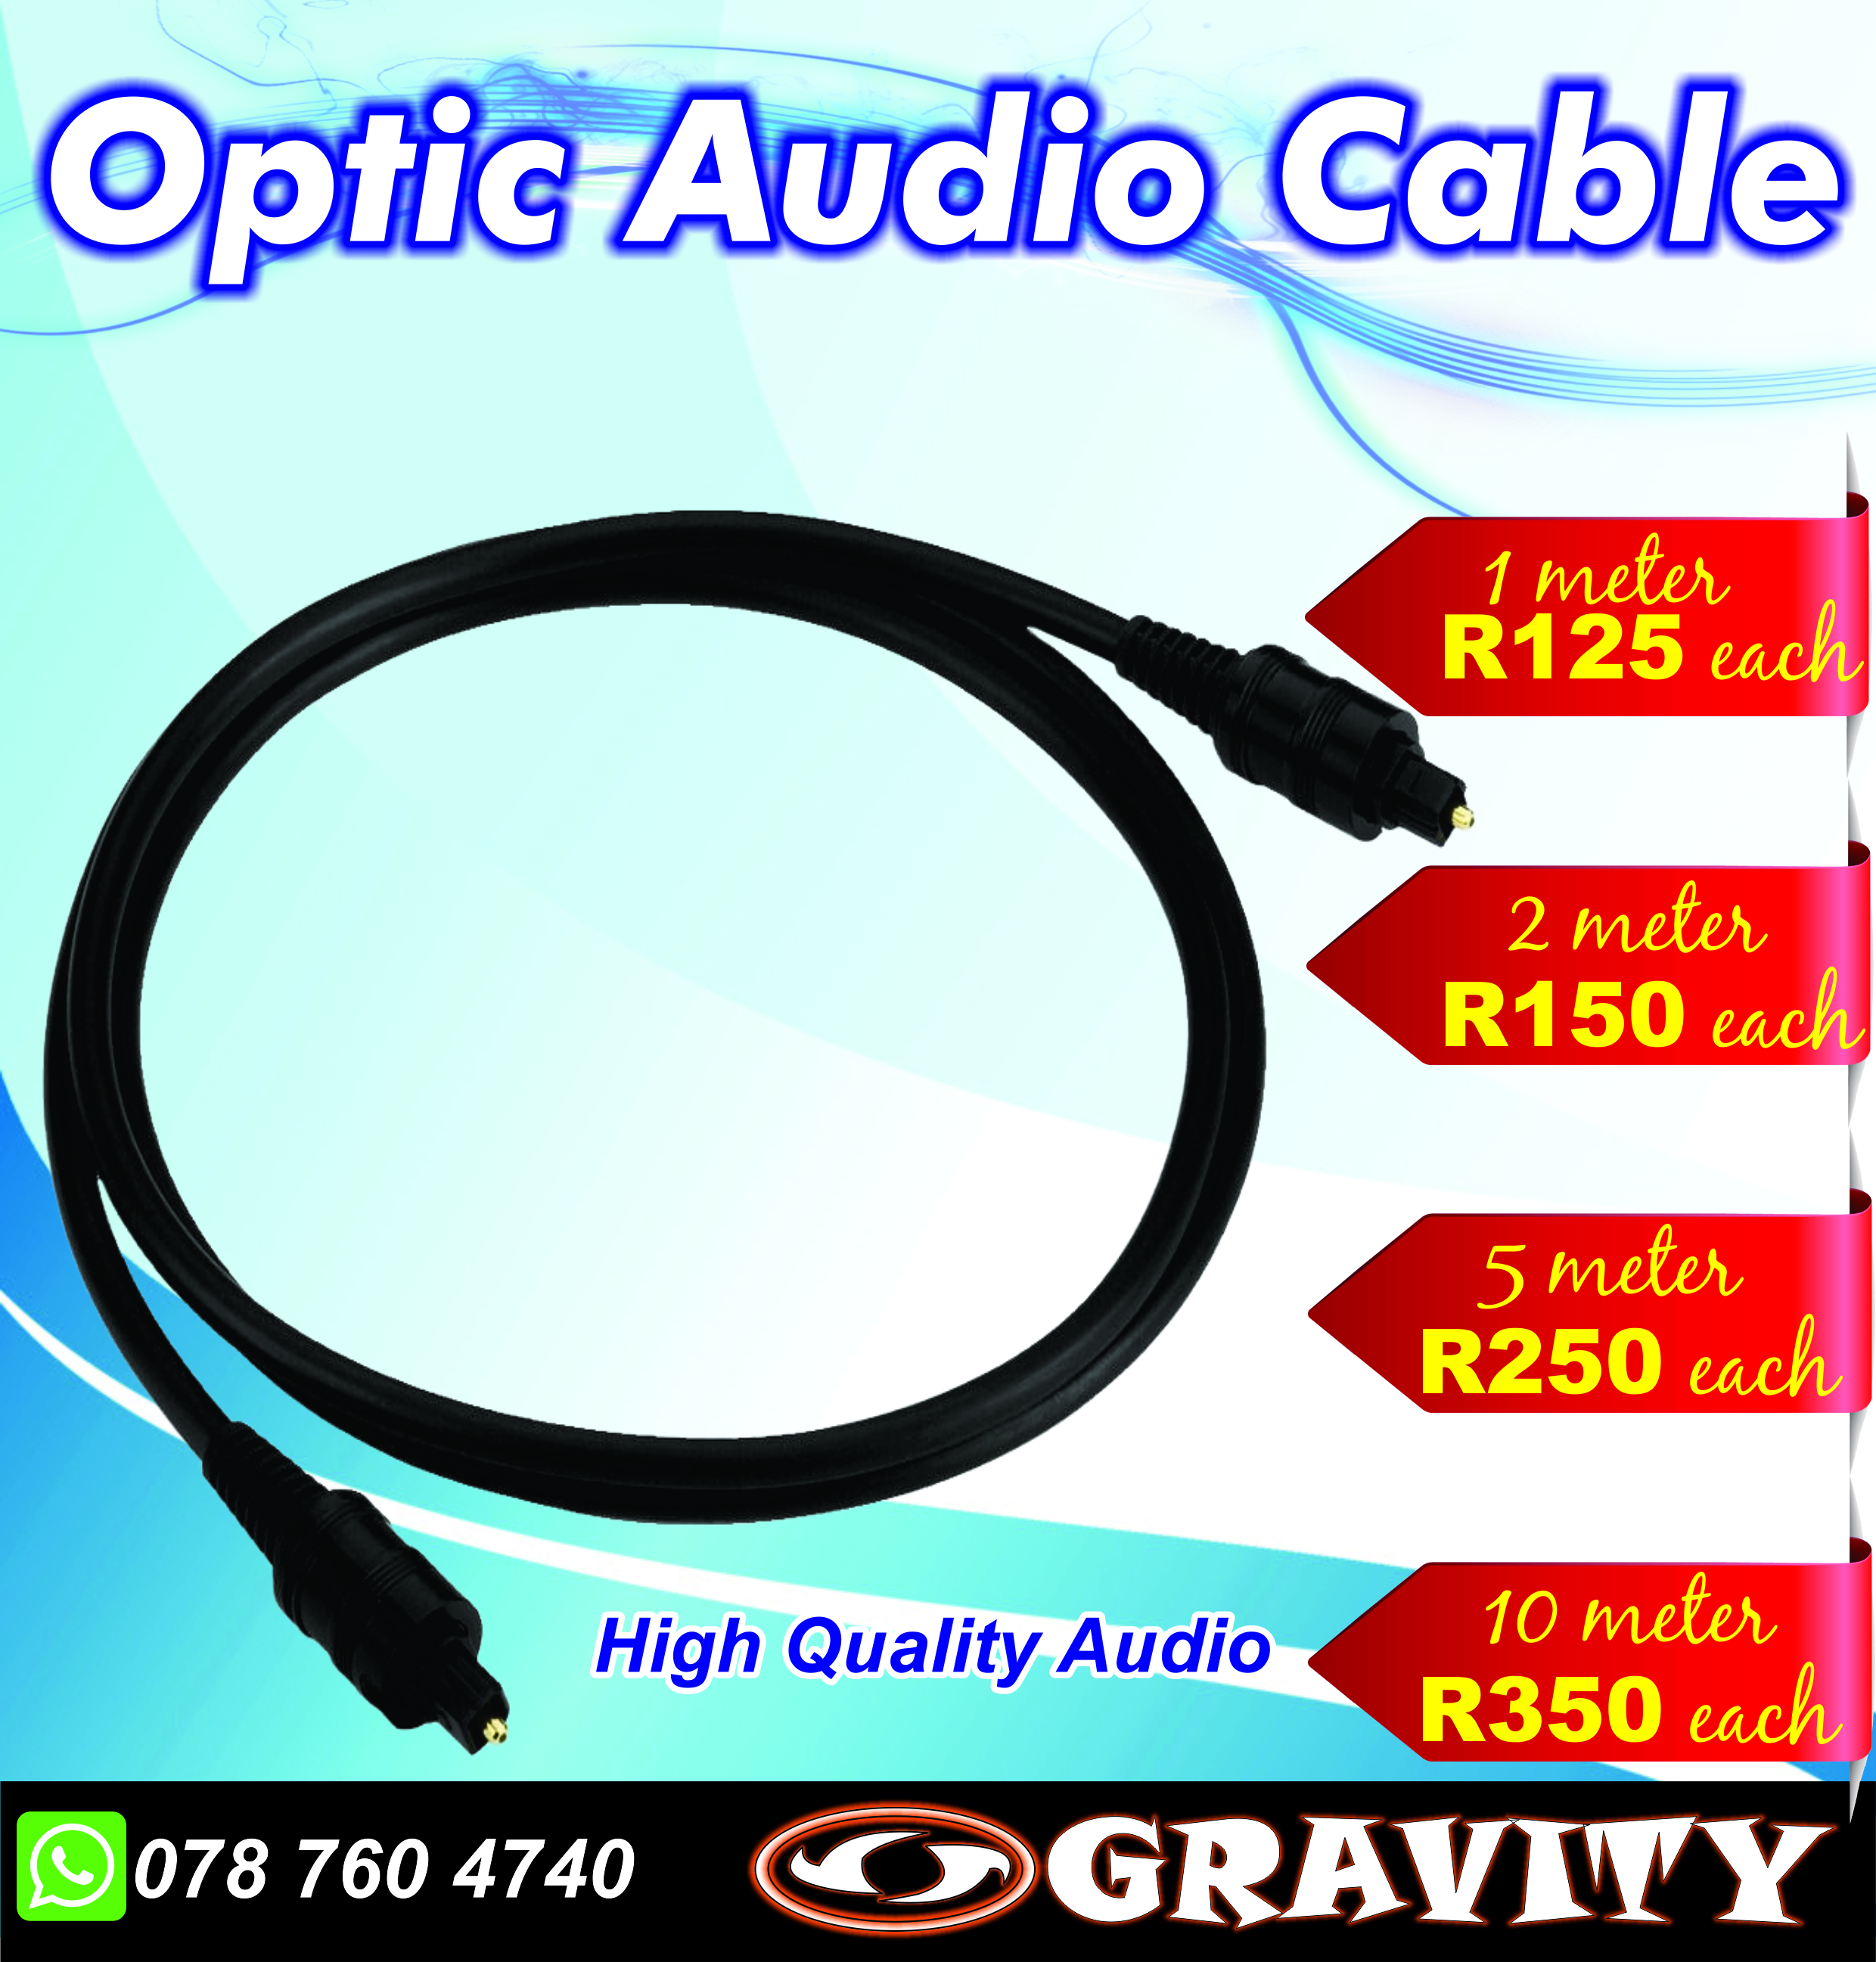 optical cable durban gravity